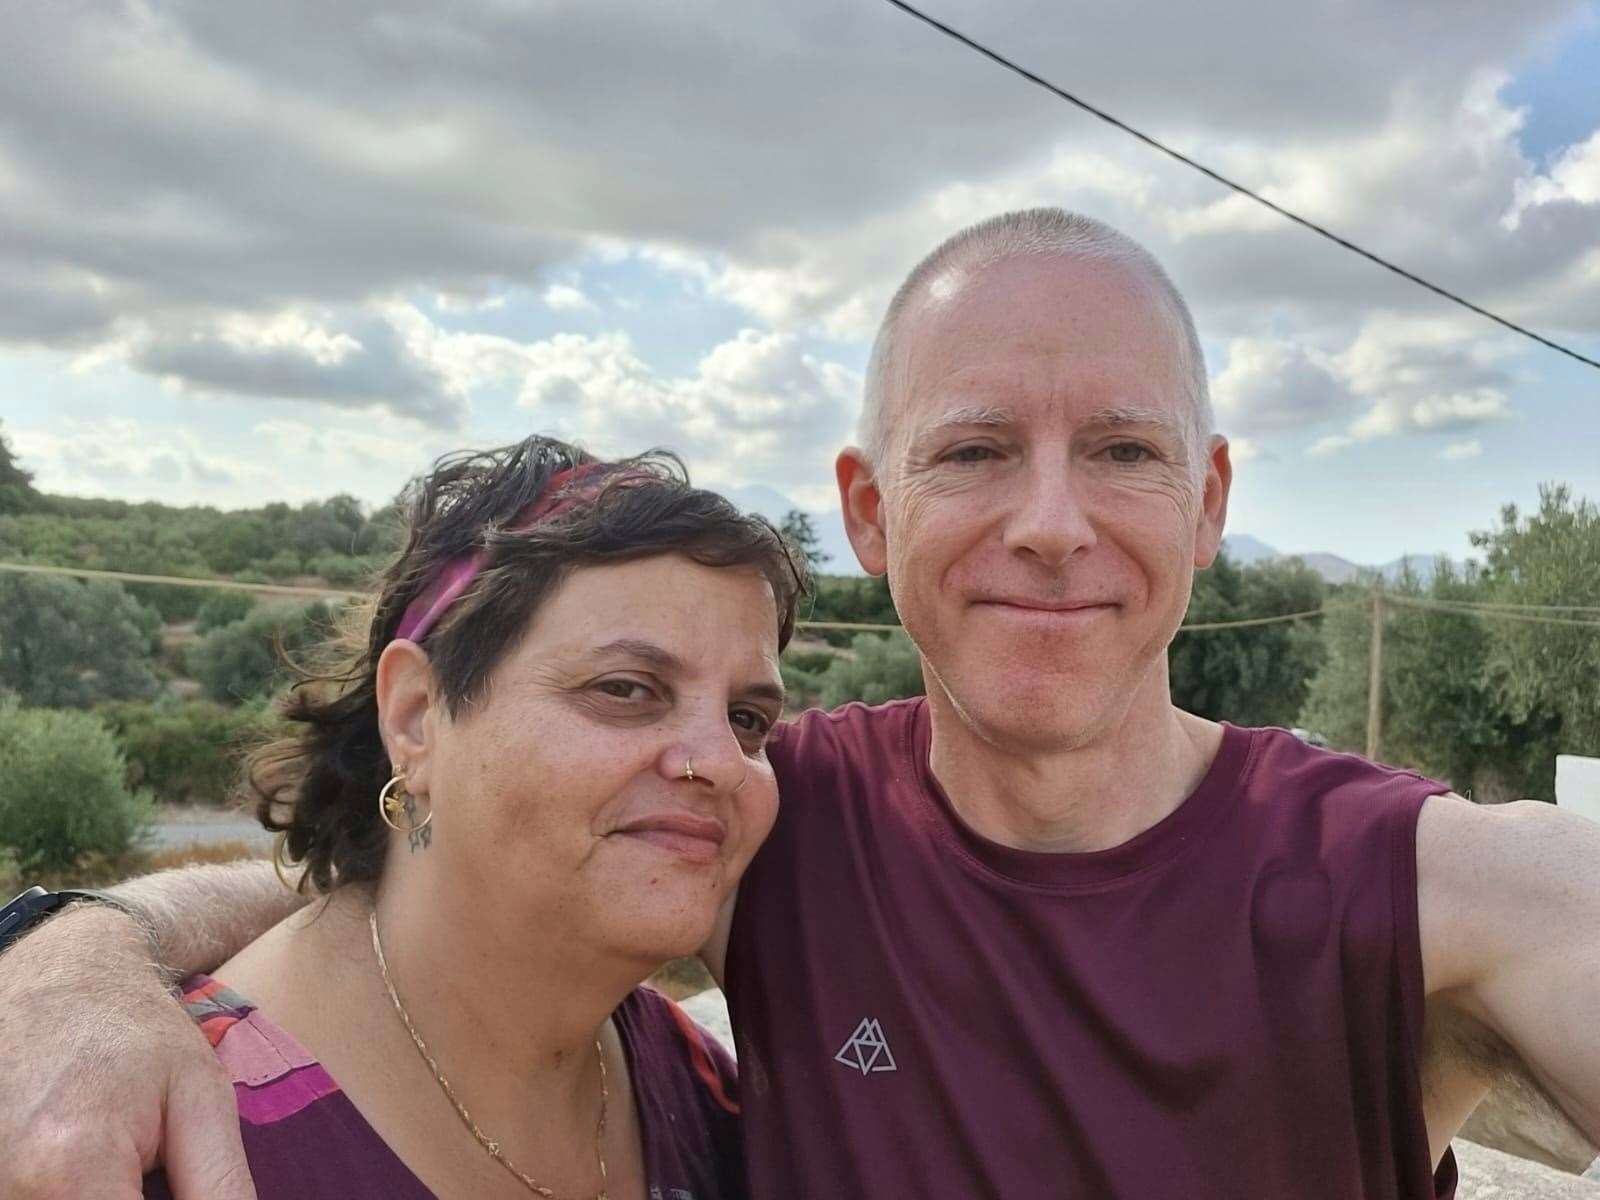 Ben and his wife Meyrav were trapped in their safe room for 12 hours after Hamas militants stormed their kibbutz and set fire to their home (Ben/PA)